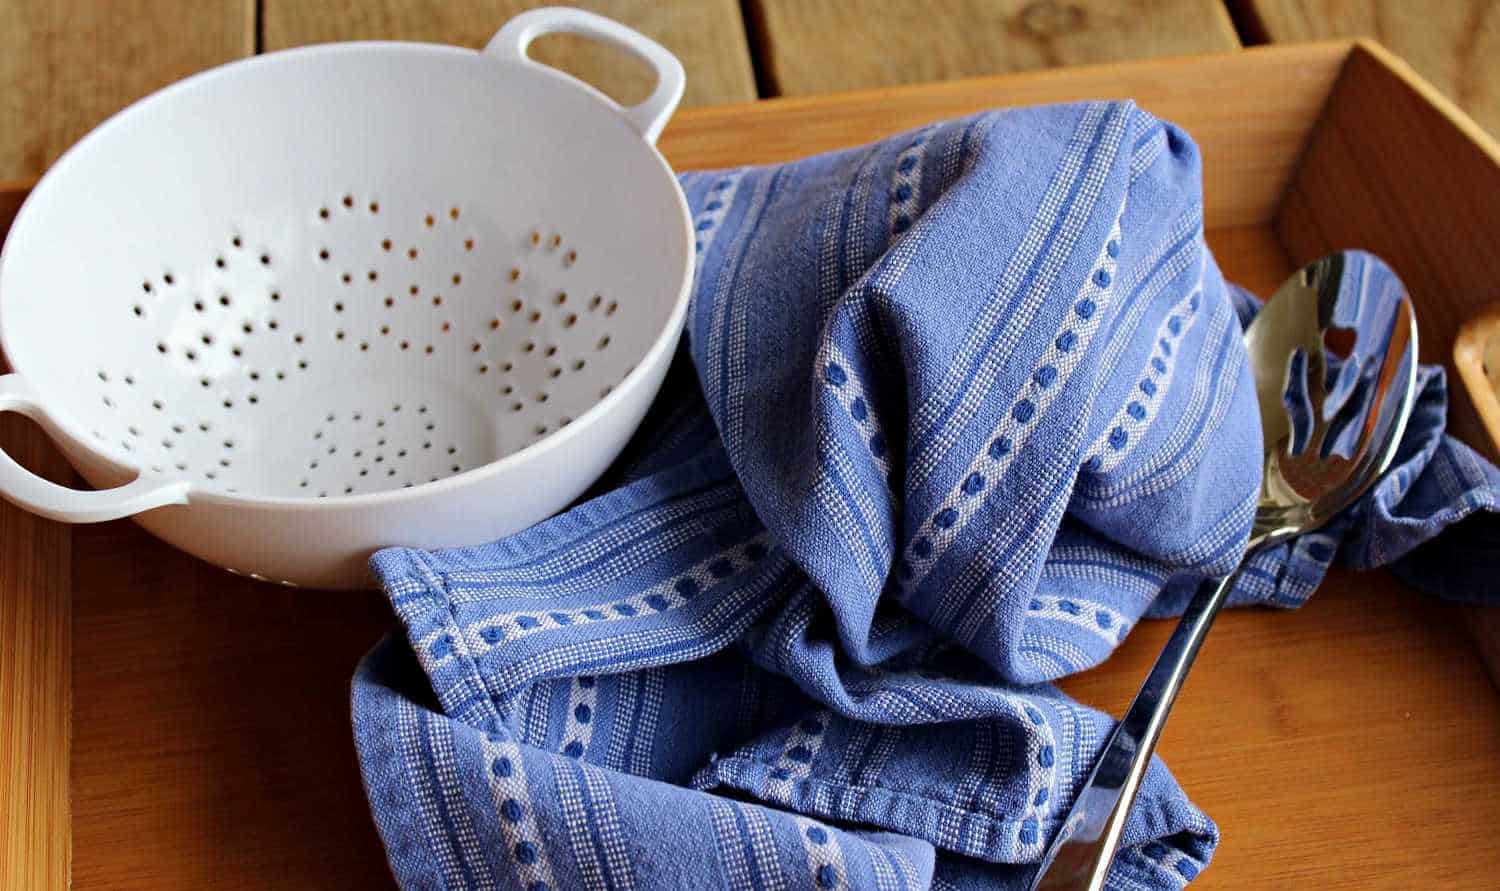 White strainer, blue towel, and slotted spoon on a wooden tray.